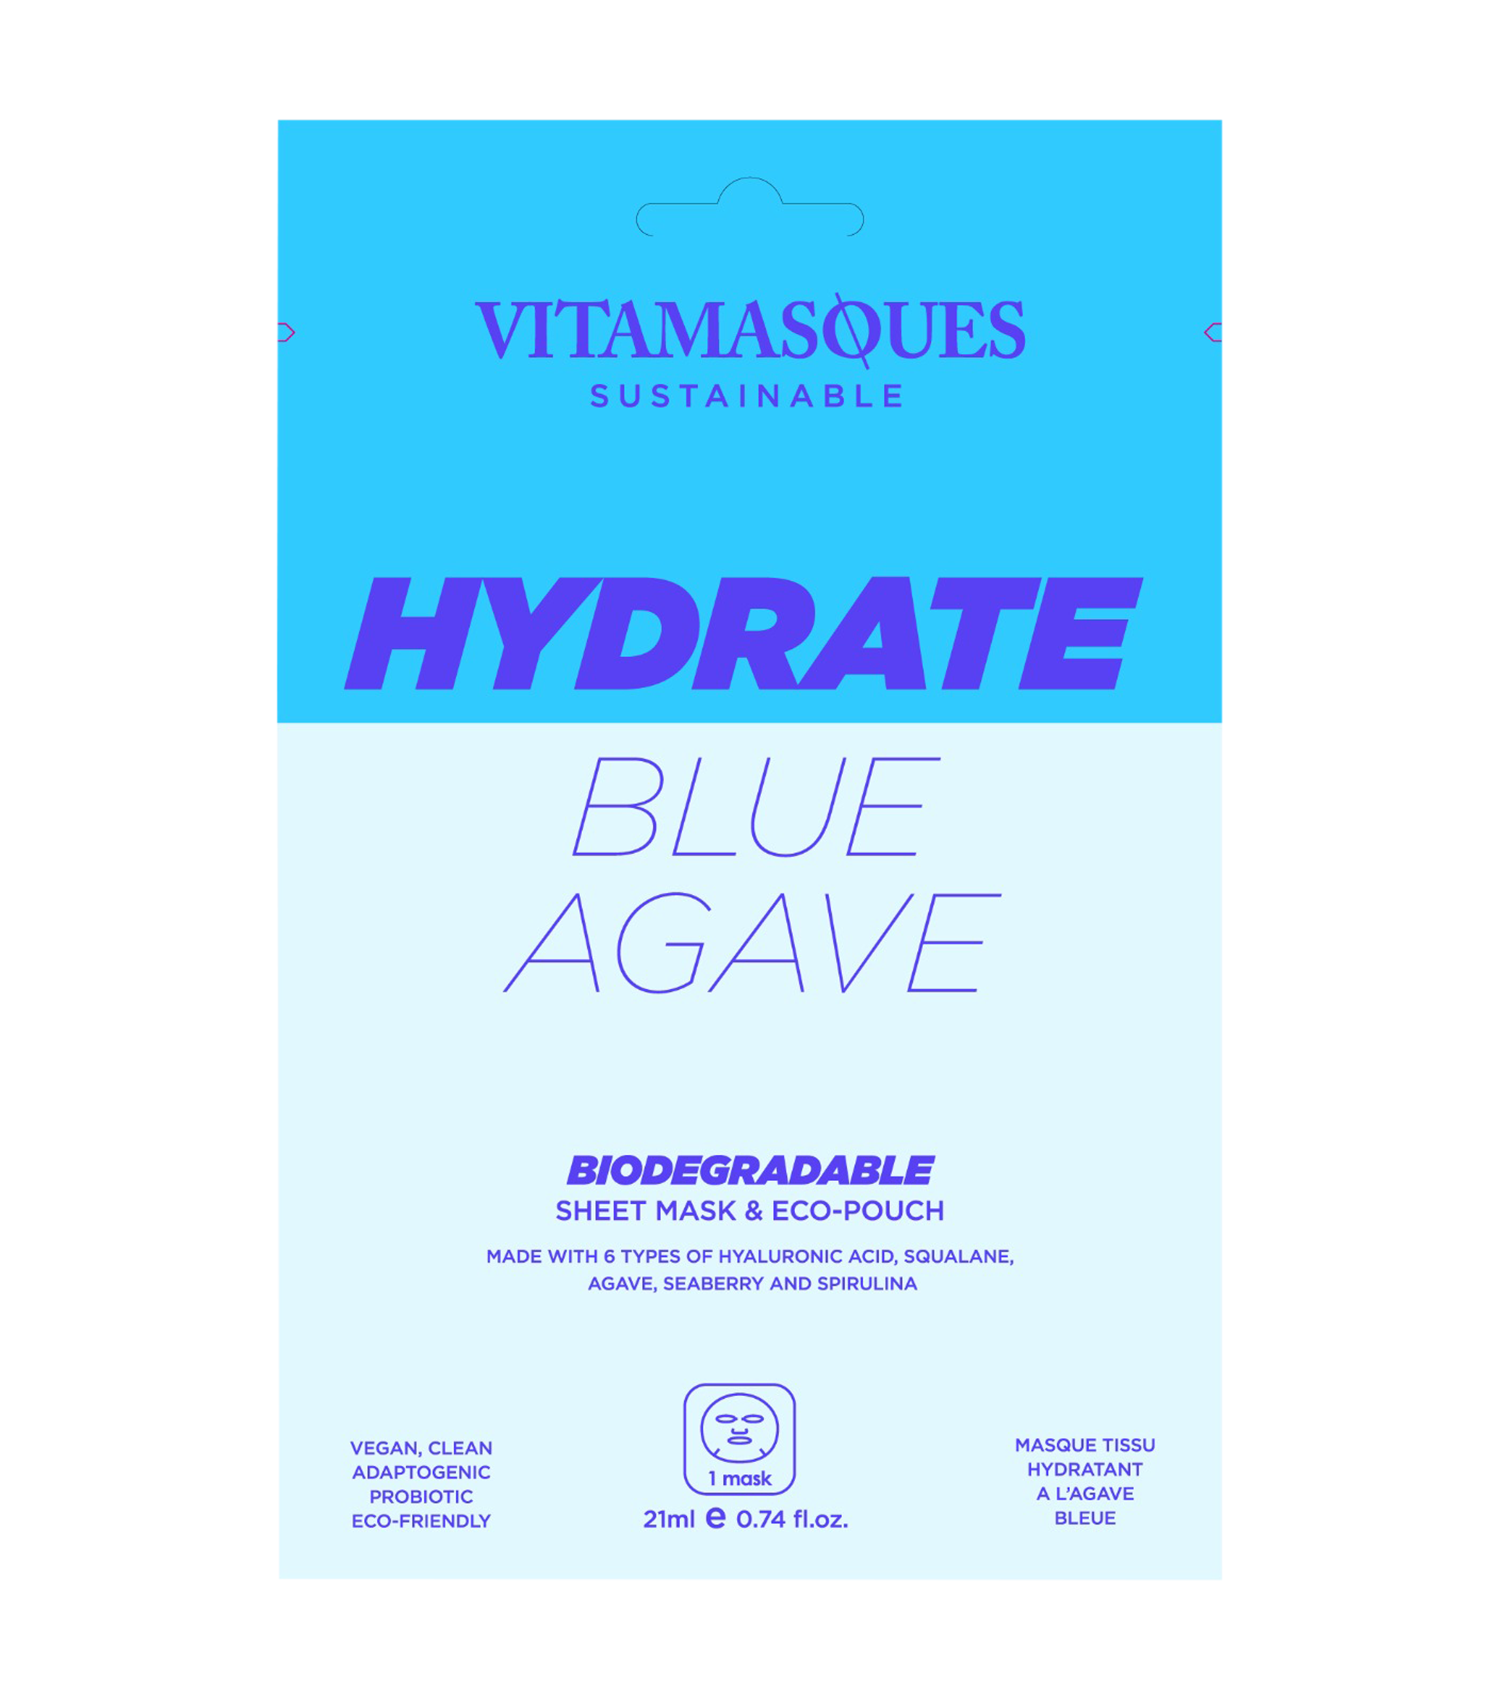 Hydrate Blue Agave Biodegradable Sheet Mask and Eco Pouch Hydrate Blue Agave Biodegradable Sheet Mask and Eco Pouch 1